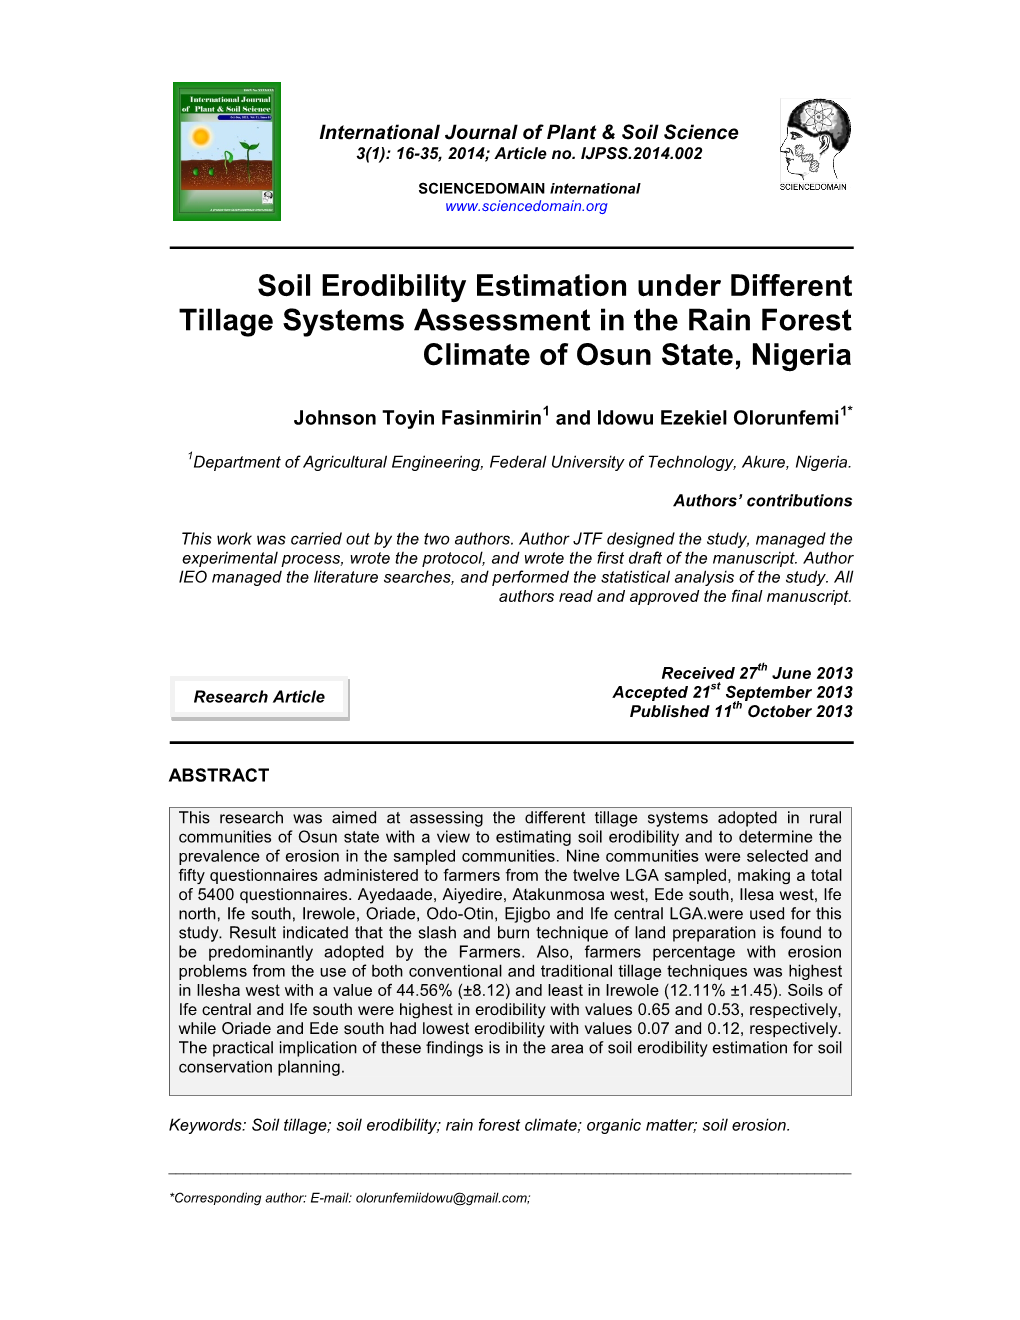 Soil Erodibility Estimation Under Different Tillage Systems Assessment in the Rain Forest Climate of Osun State, Nigeria